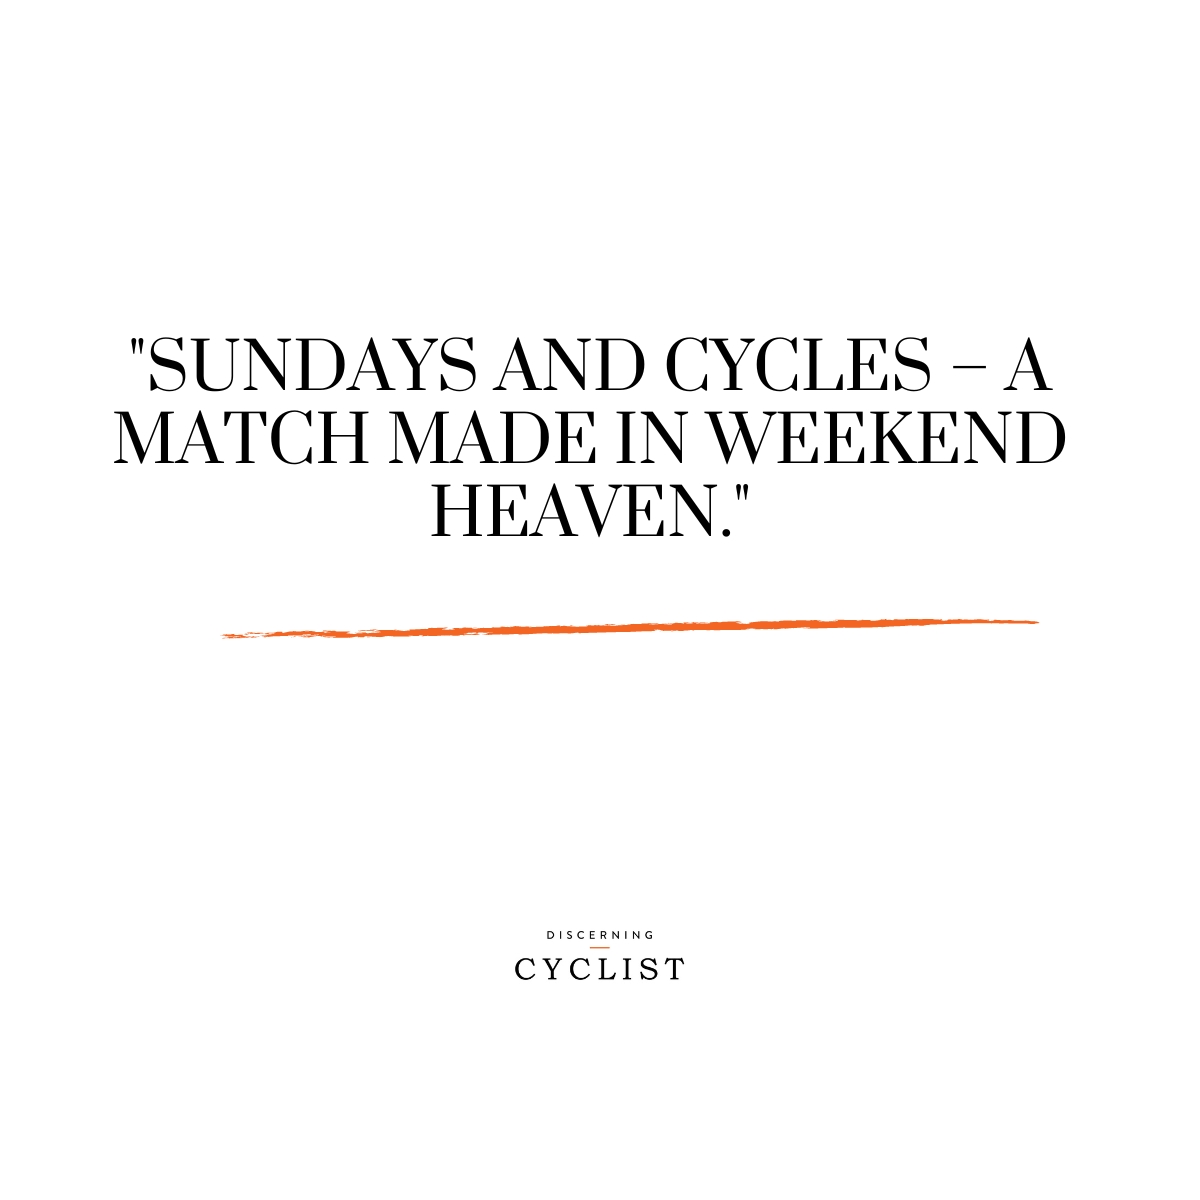 "Sundays and cycles – a match made in weekend heaven."